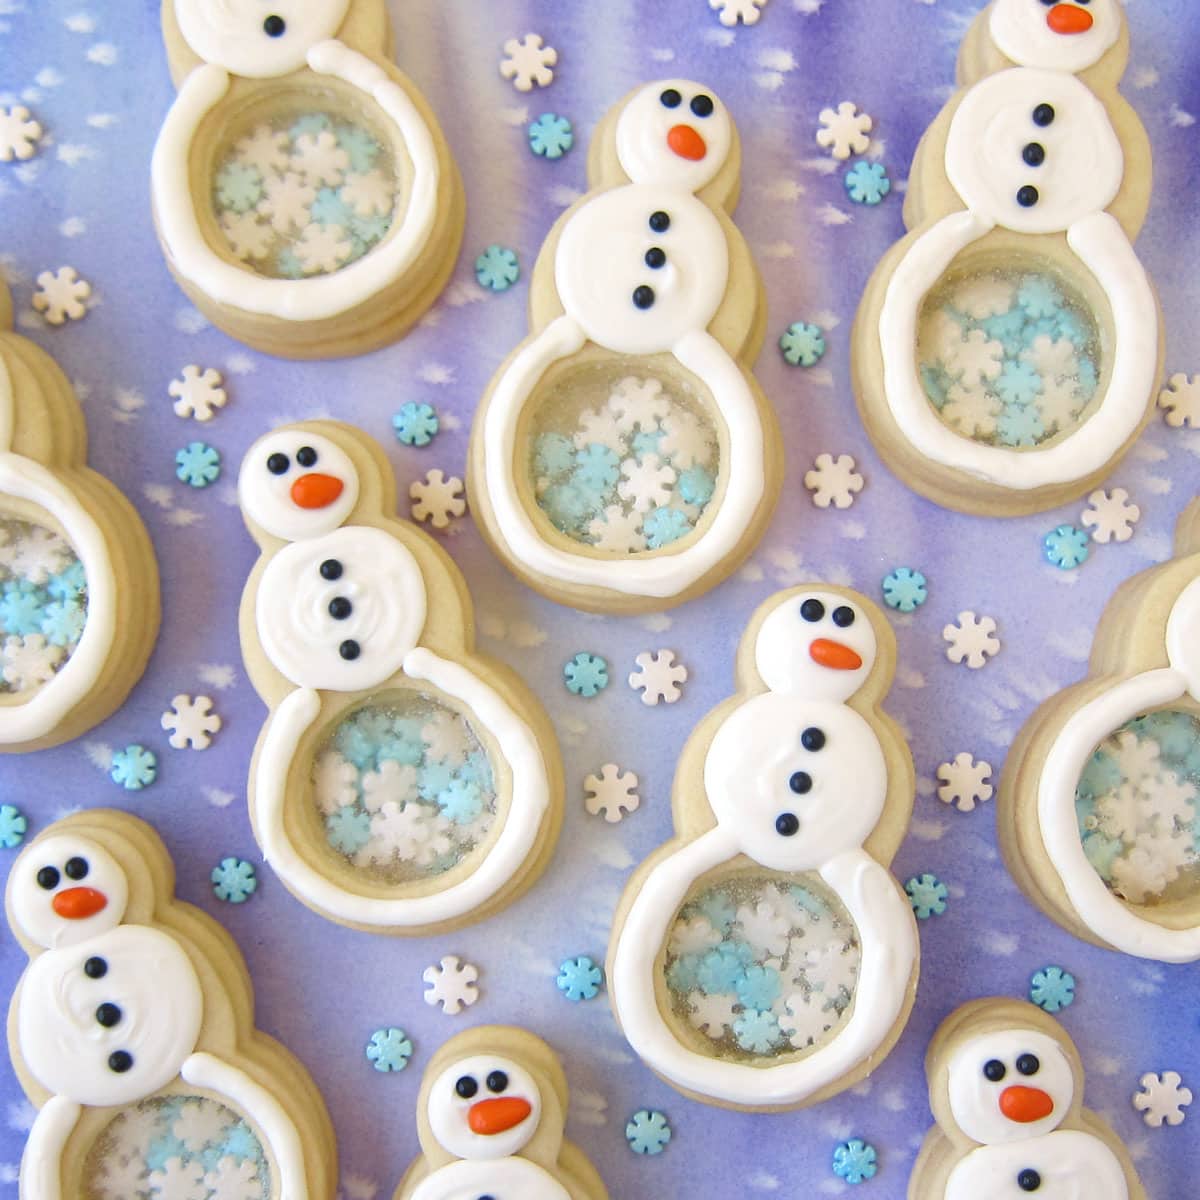 snowman cookies with a candy glass belly with snowflakes inside.